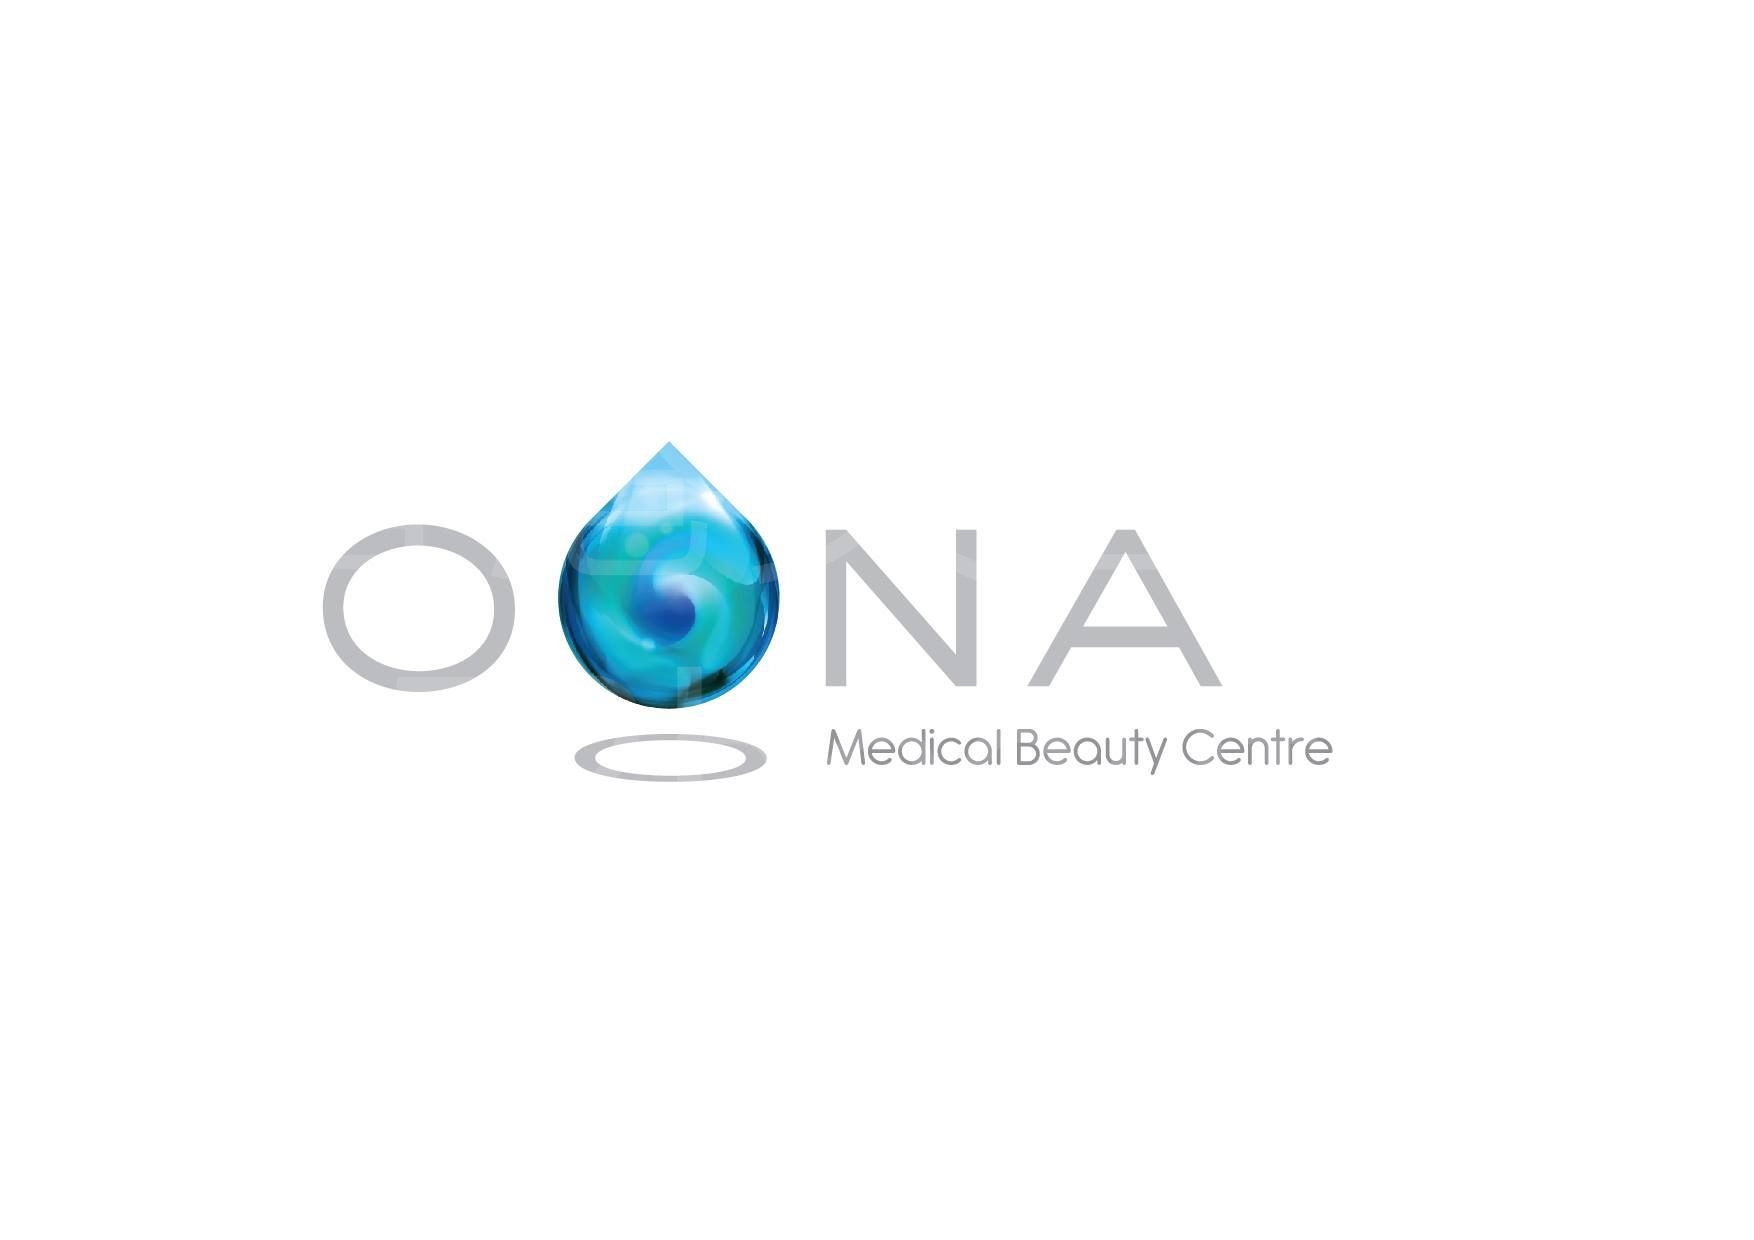 : OONA Medical Beauty Centre